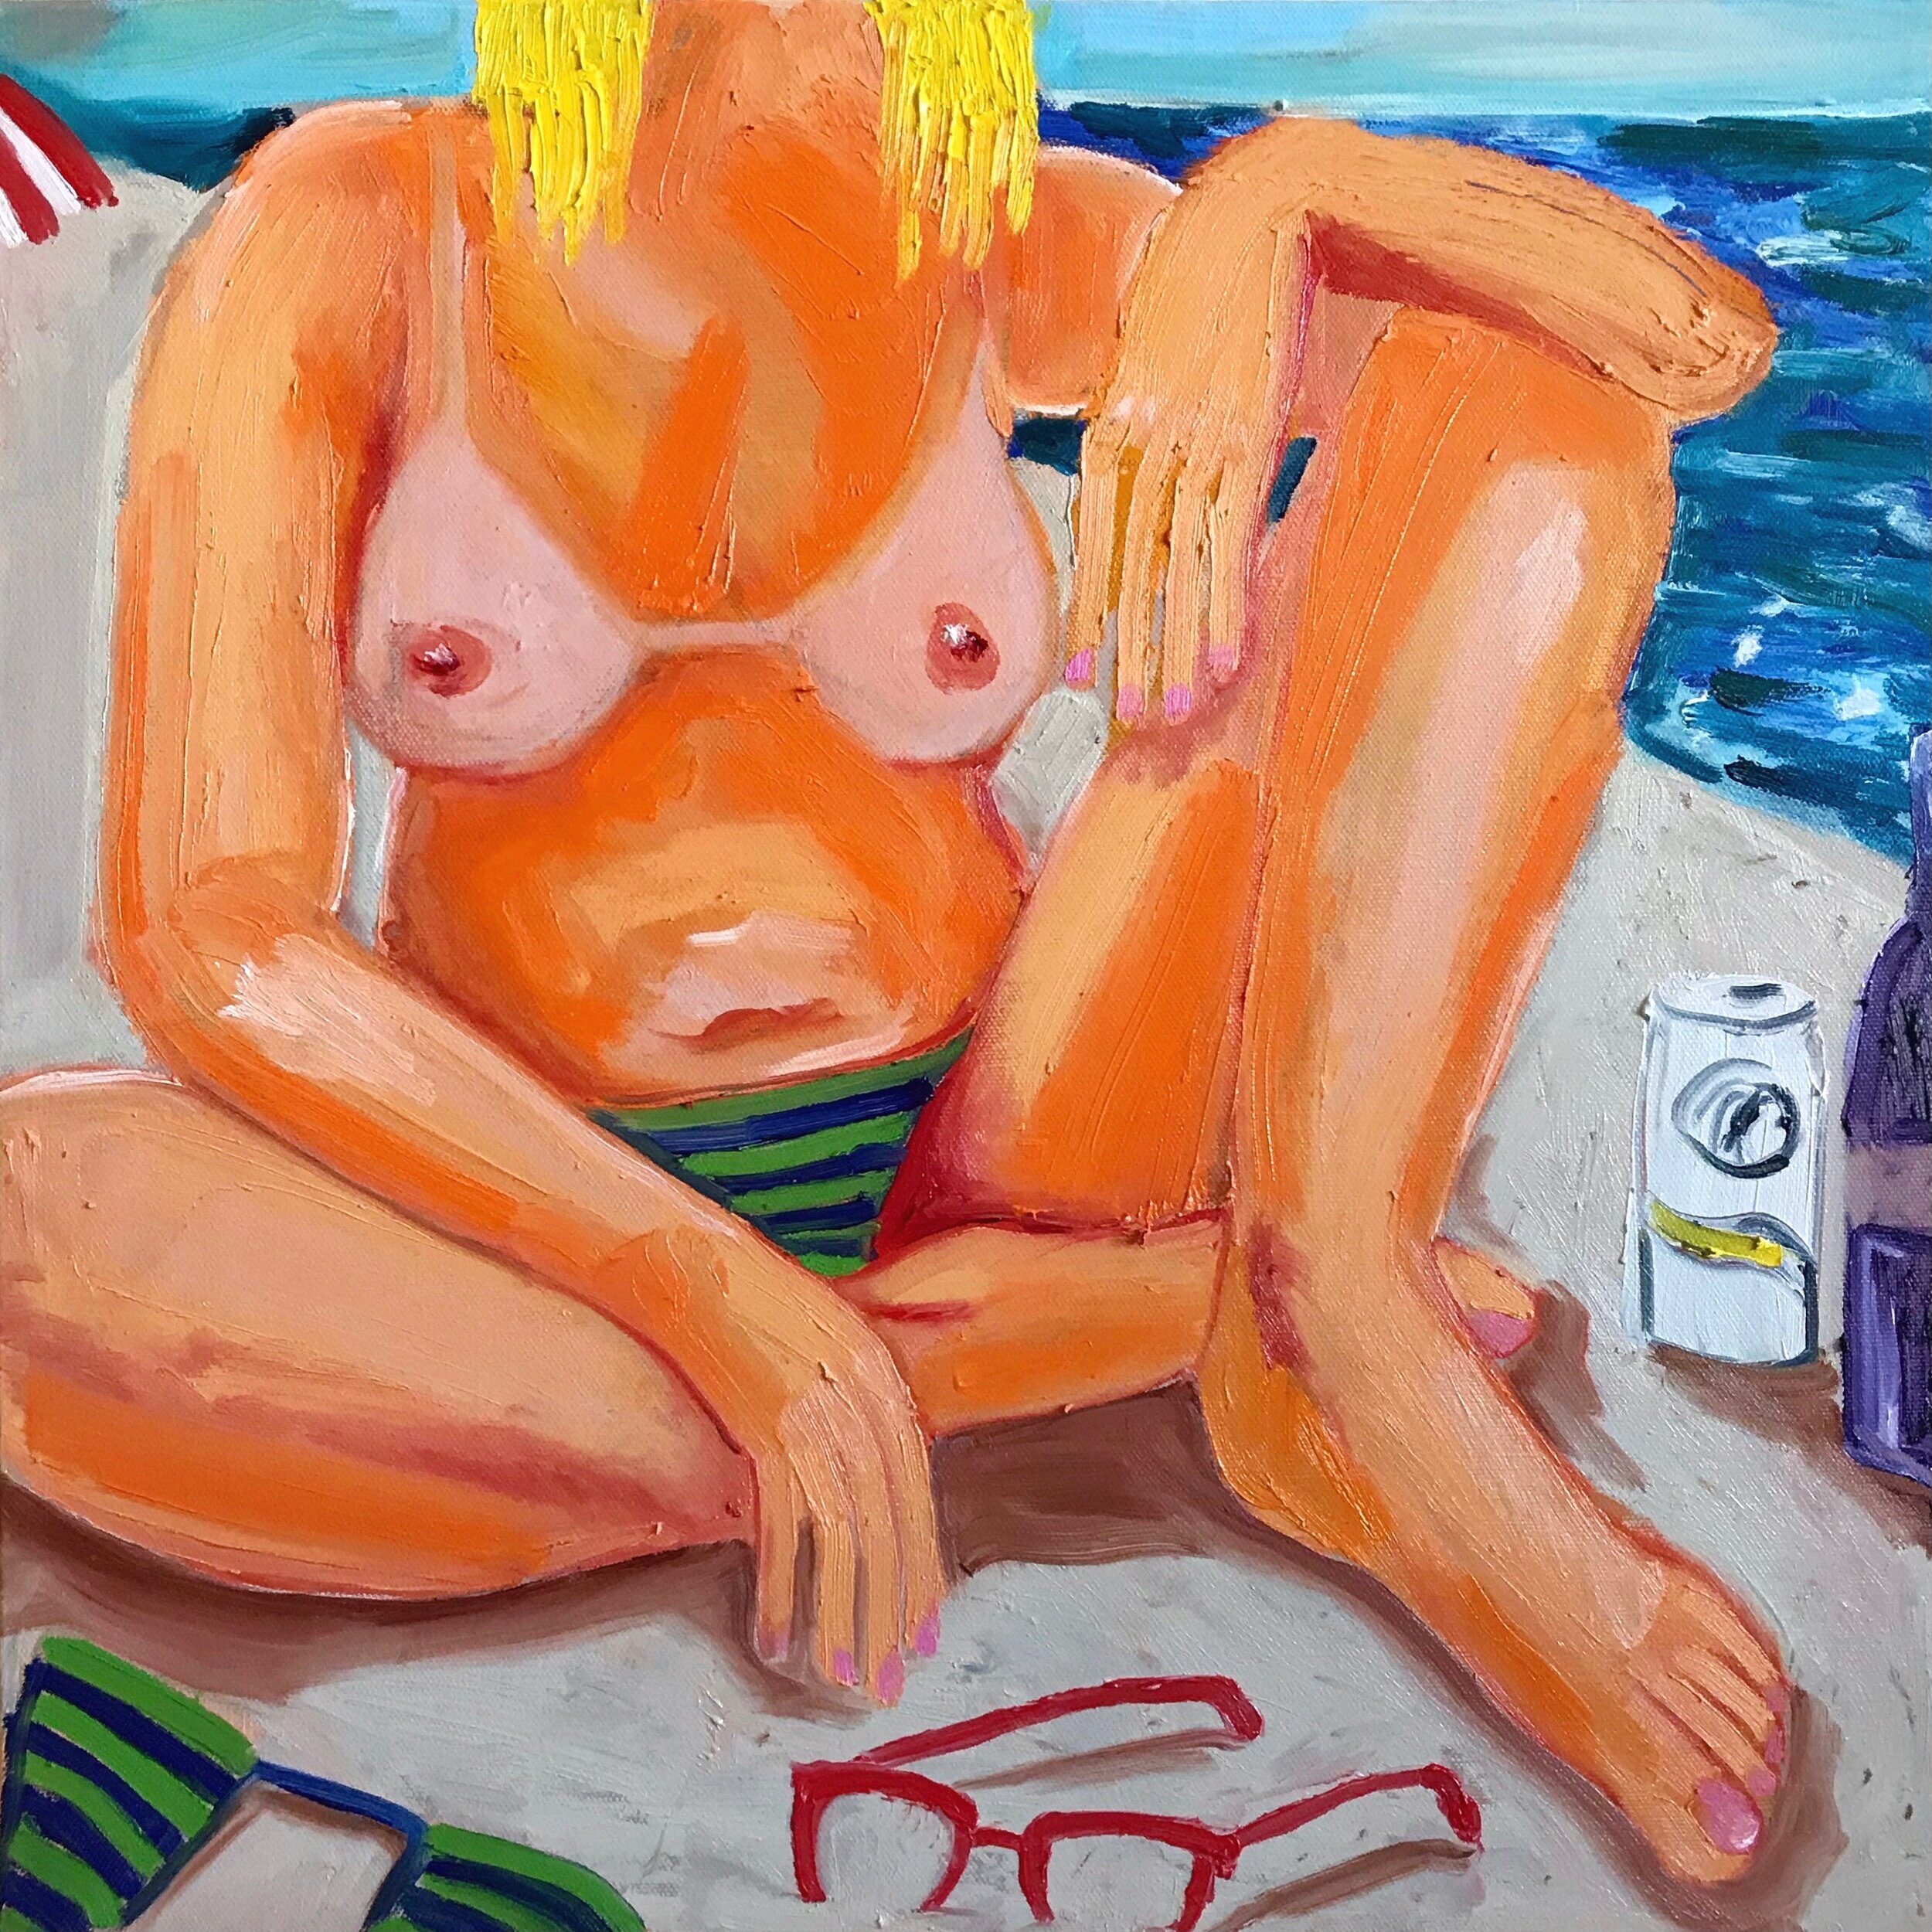  Do You Like My Tan Lines?  Oil Paint on Canvas  2021  20 inches x 20 inches 